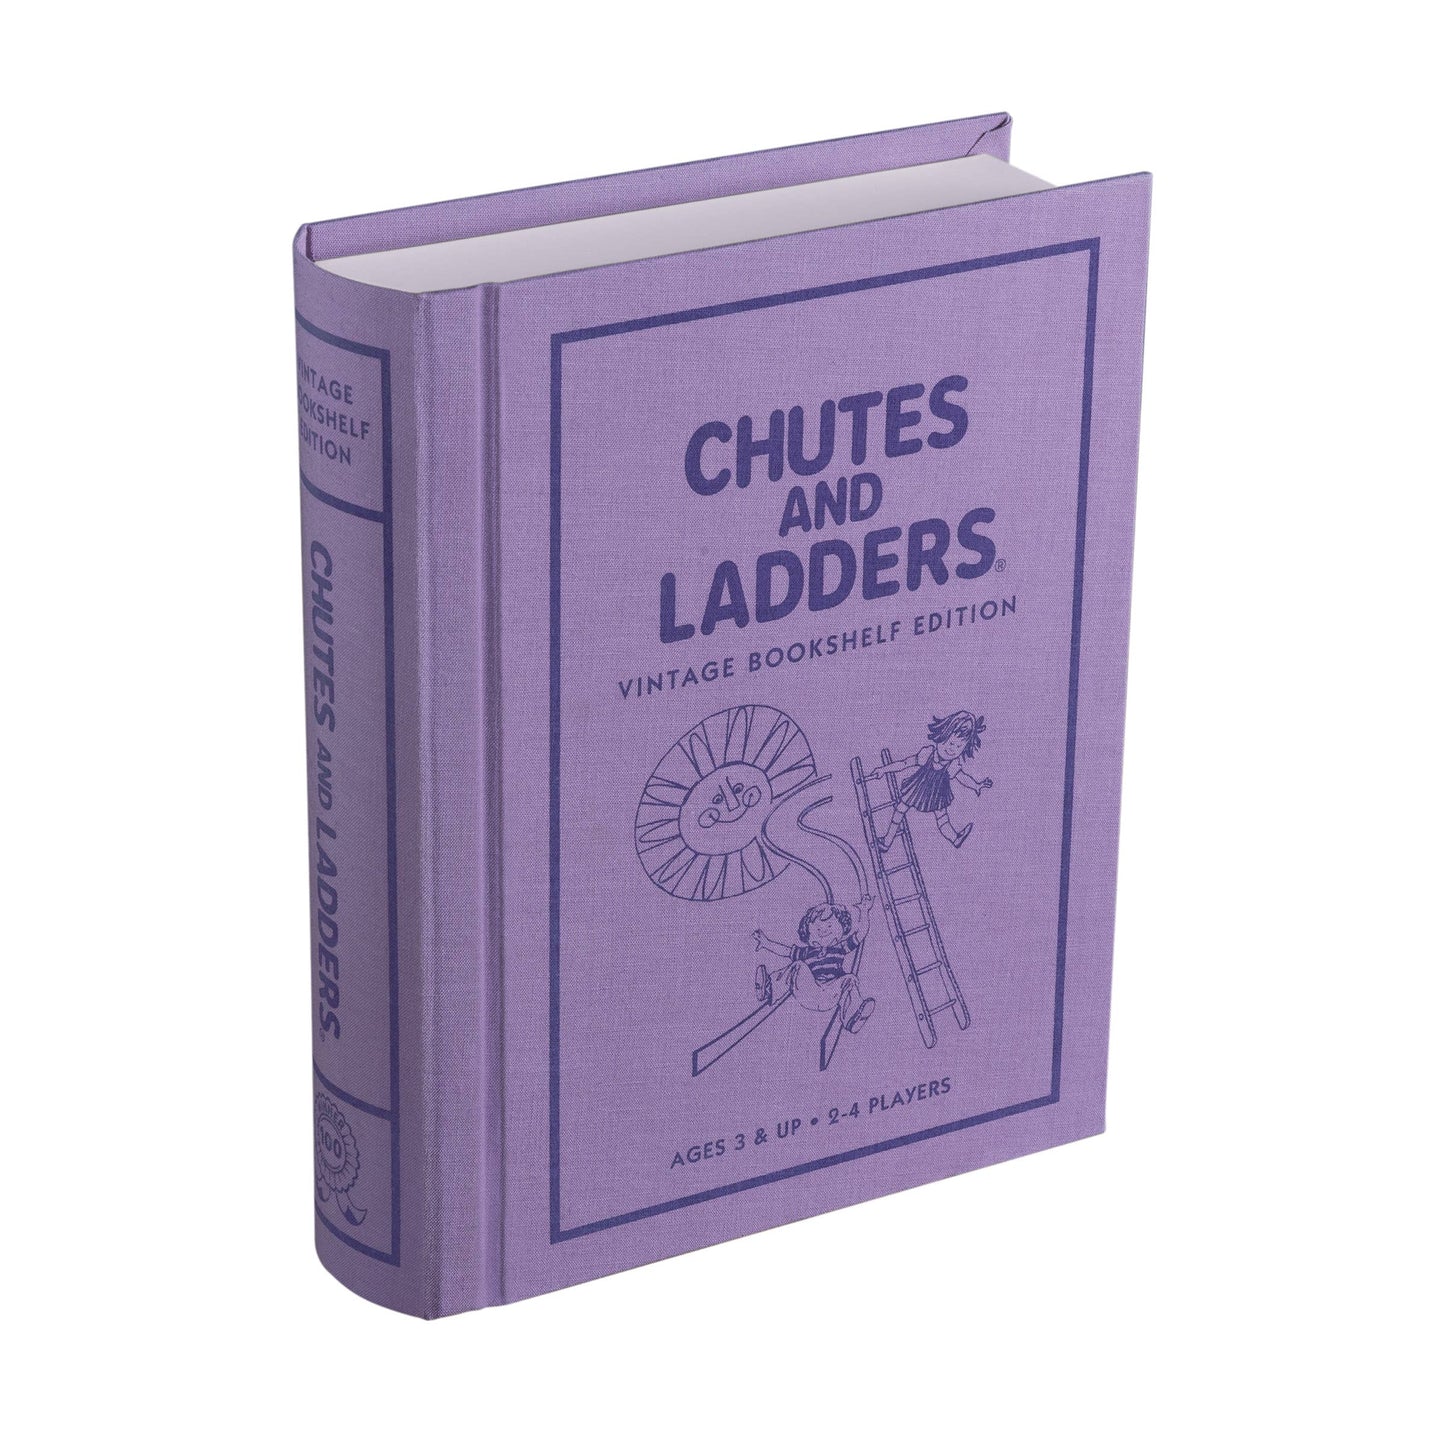 Chutes and Ladders Board Game Vintage Bookshelf Edition